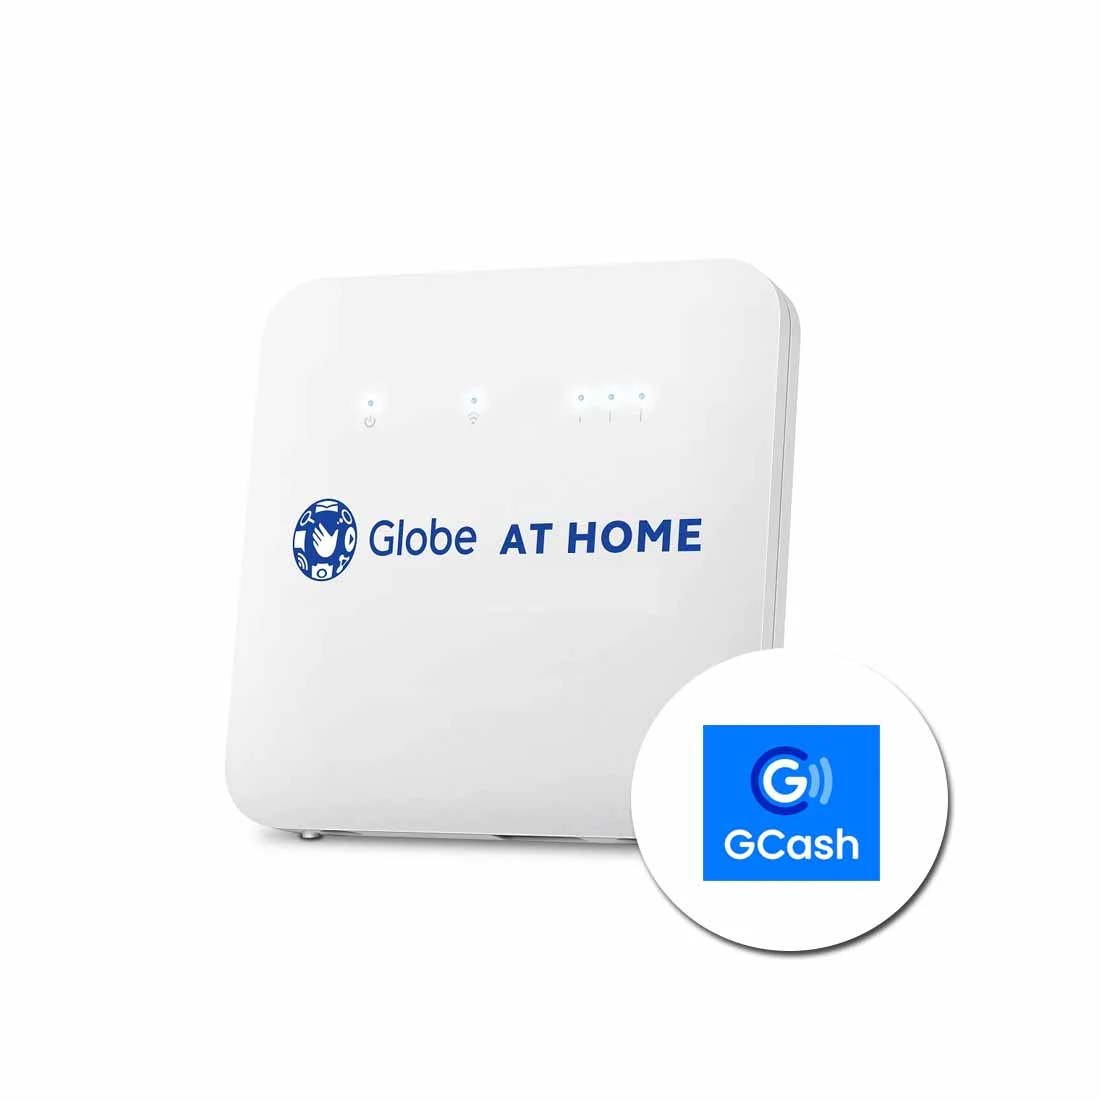 Up to P500 in GCash credits on any mobile or broadband postpaid plan